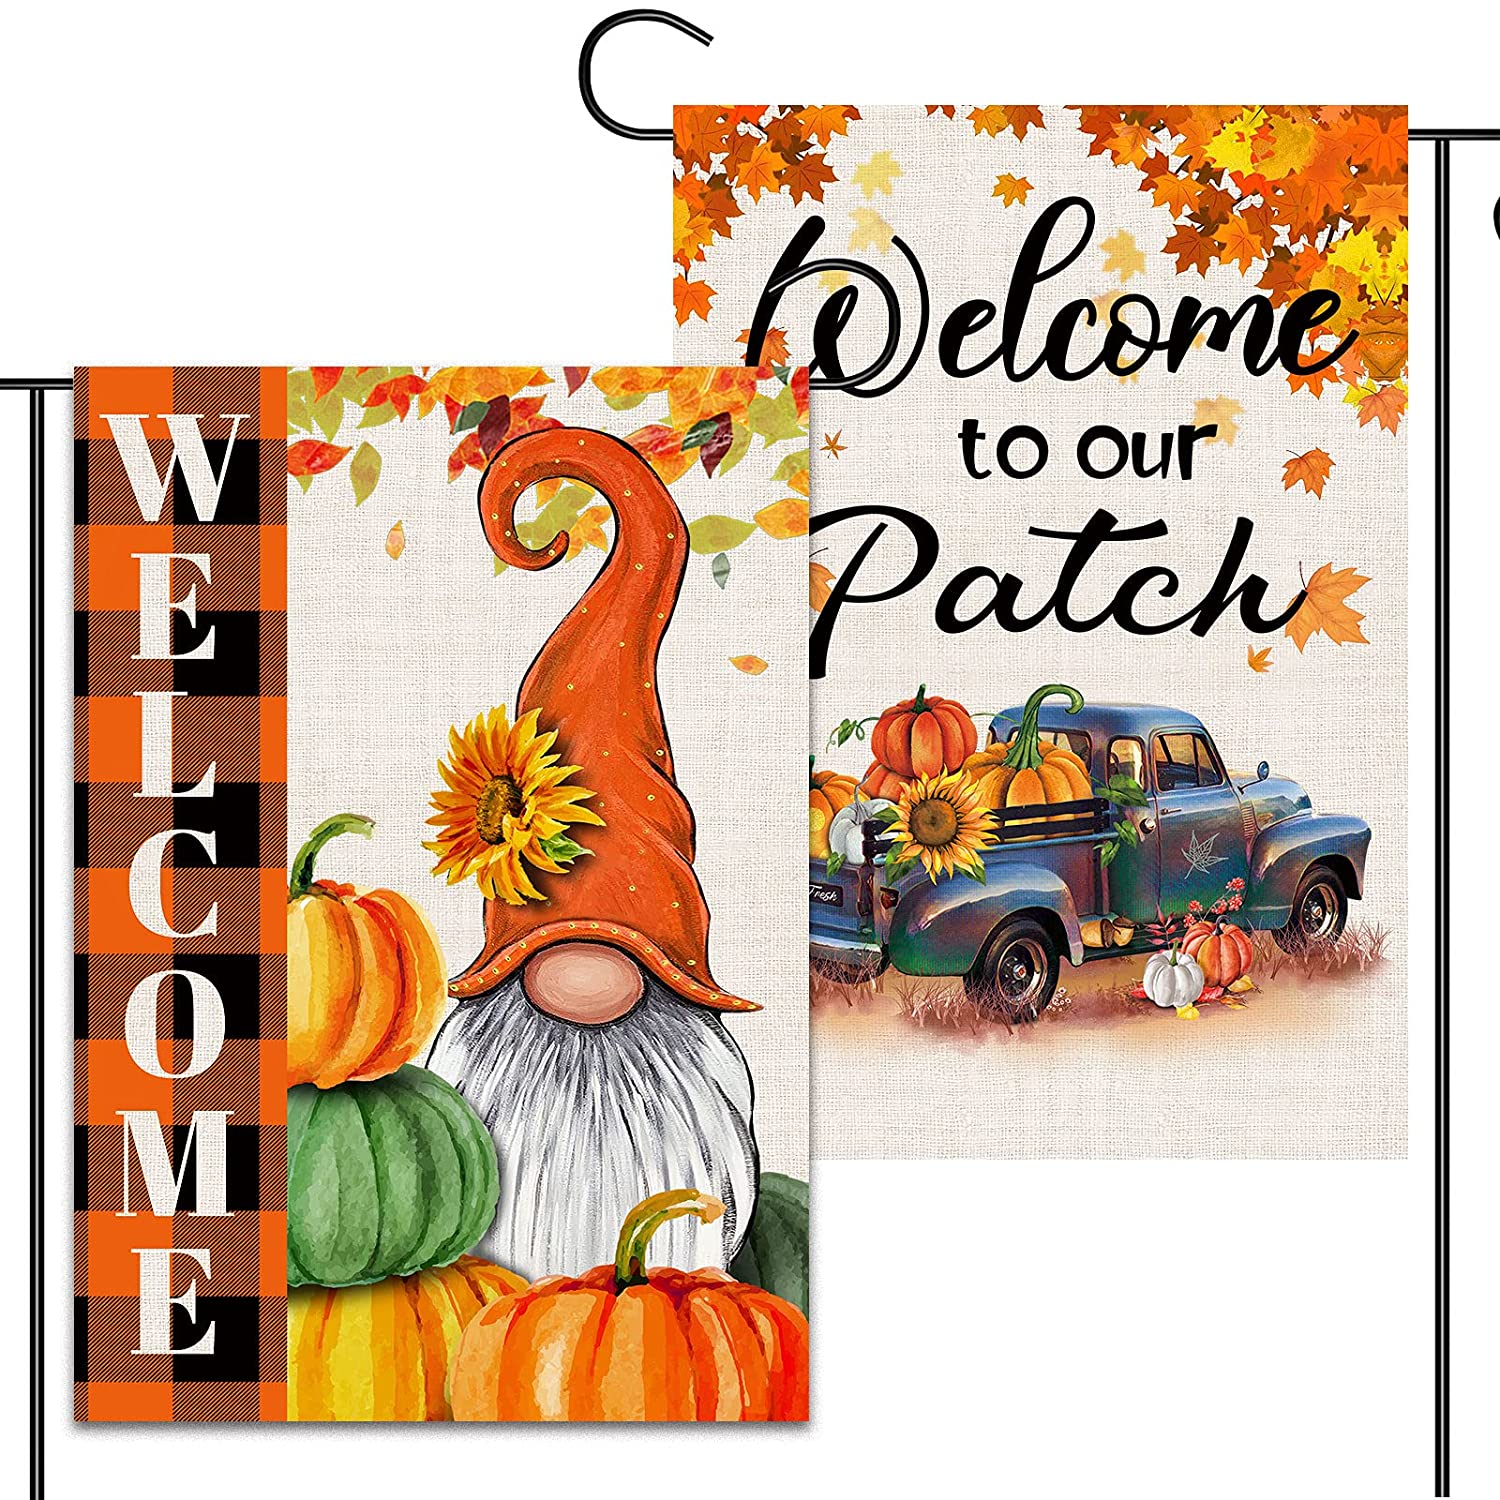 2 Pcs Harvest Fall Garden Flags 12x18 Double Sided, Burlap Pumpkin Truck And Buffalo Plaid Gnome Thanksgiving Garden Flags, Outdoor Yard Decors for Pumpkin Patch Welcome Sign